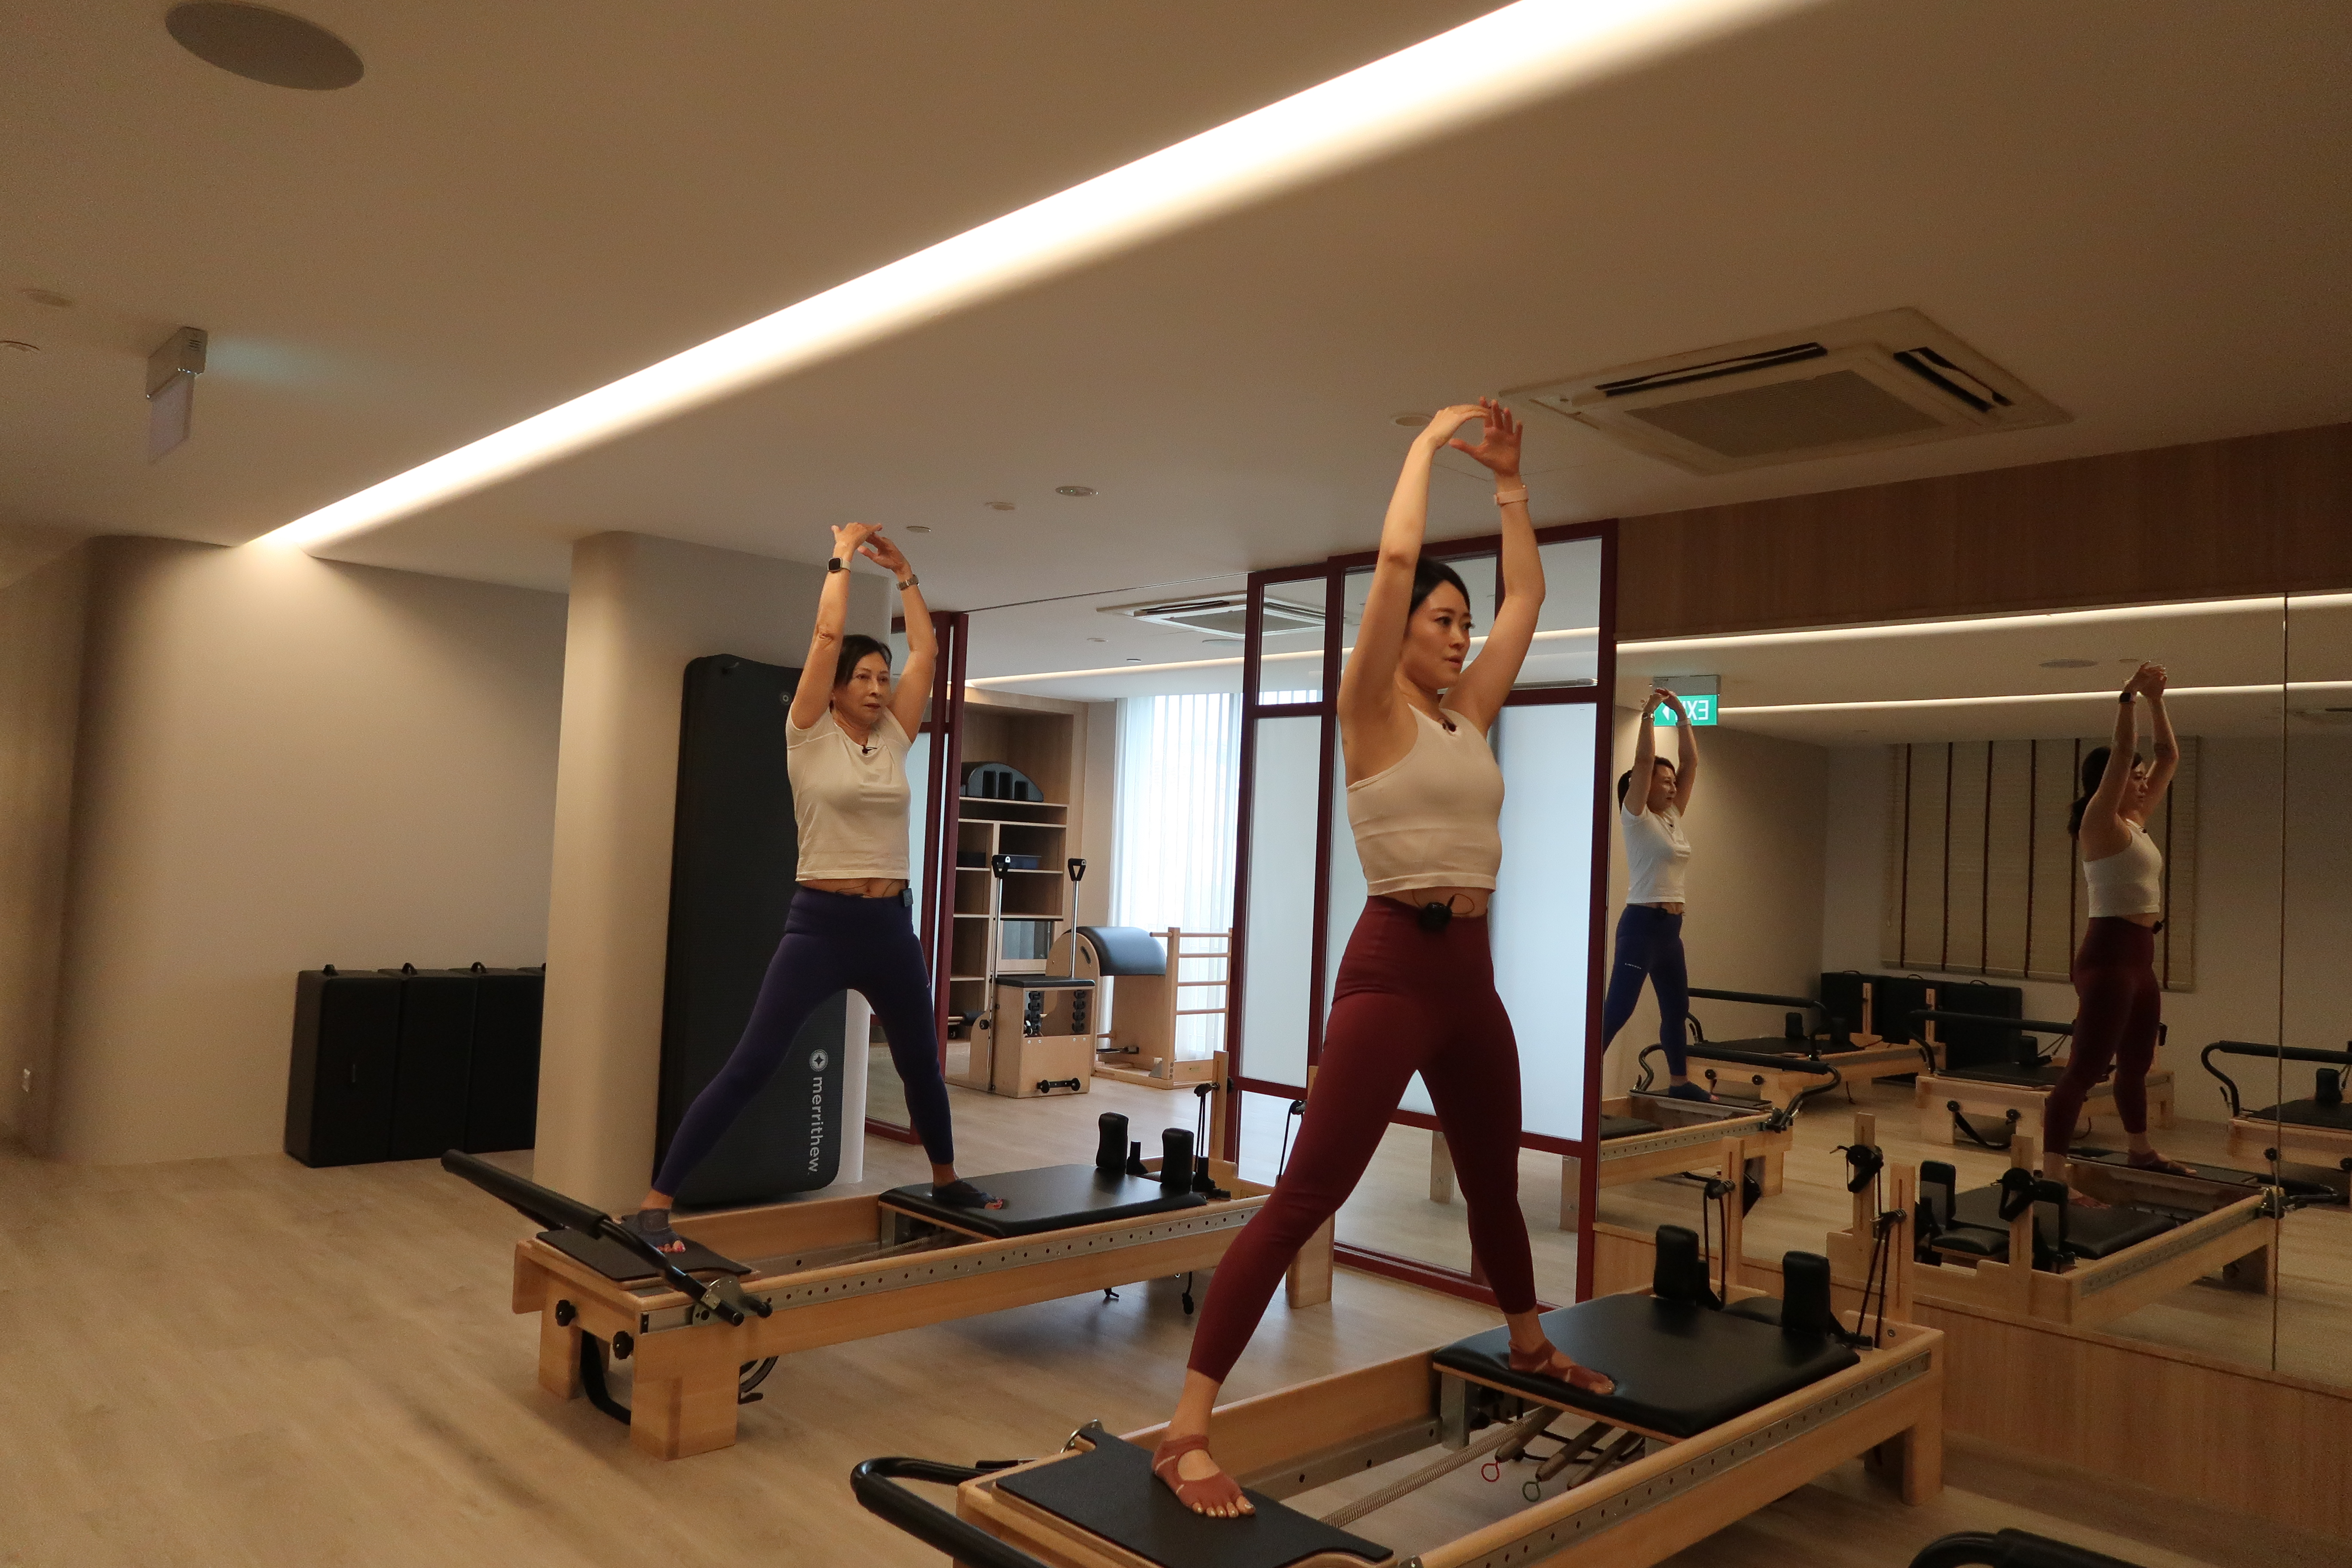 The two women using a reformer pilates machine.